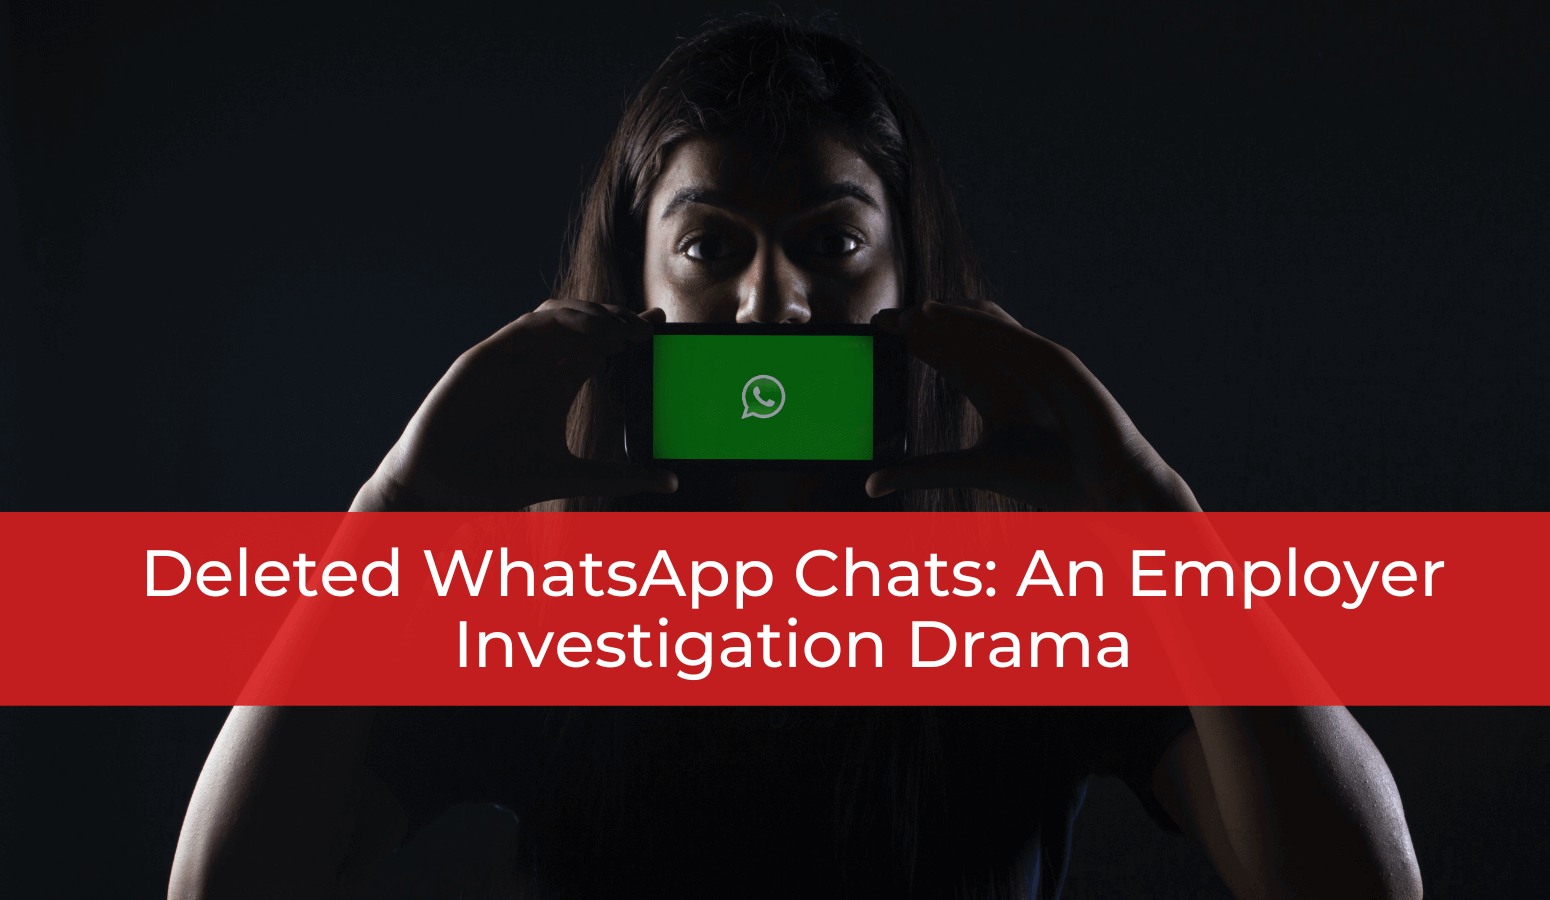 Featured image for “Deleted WhatsApp Chats: An Employer Investigation Drama”